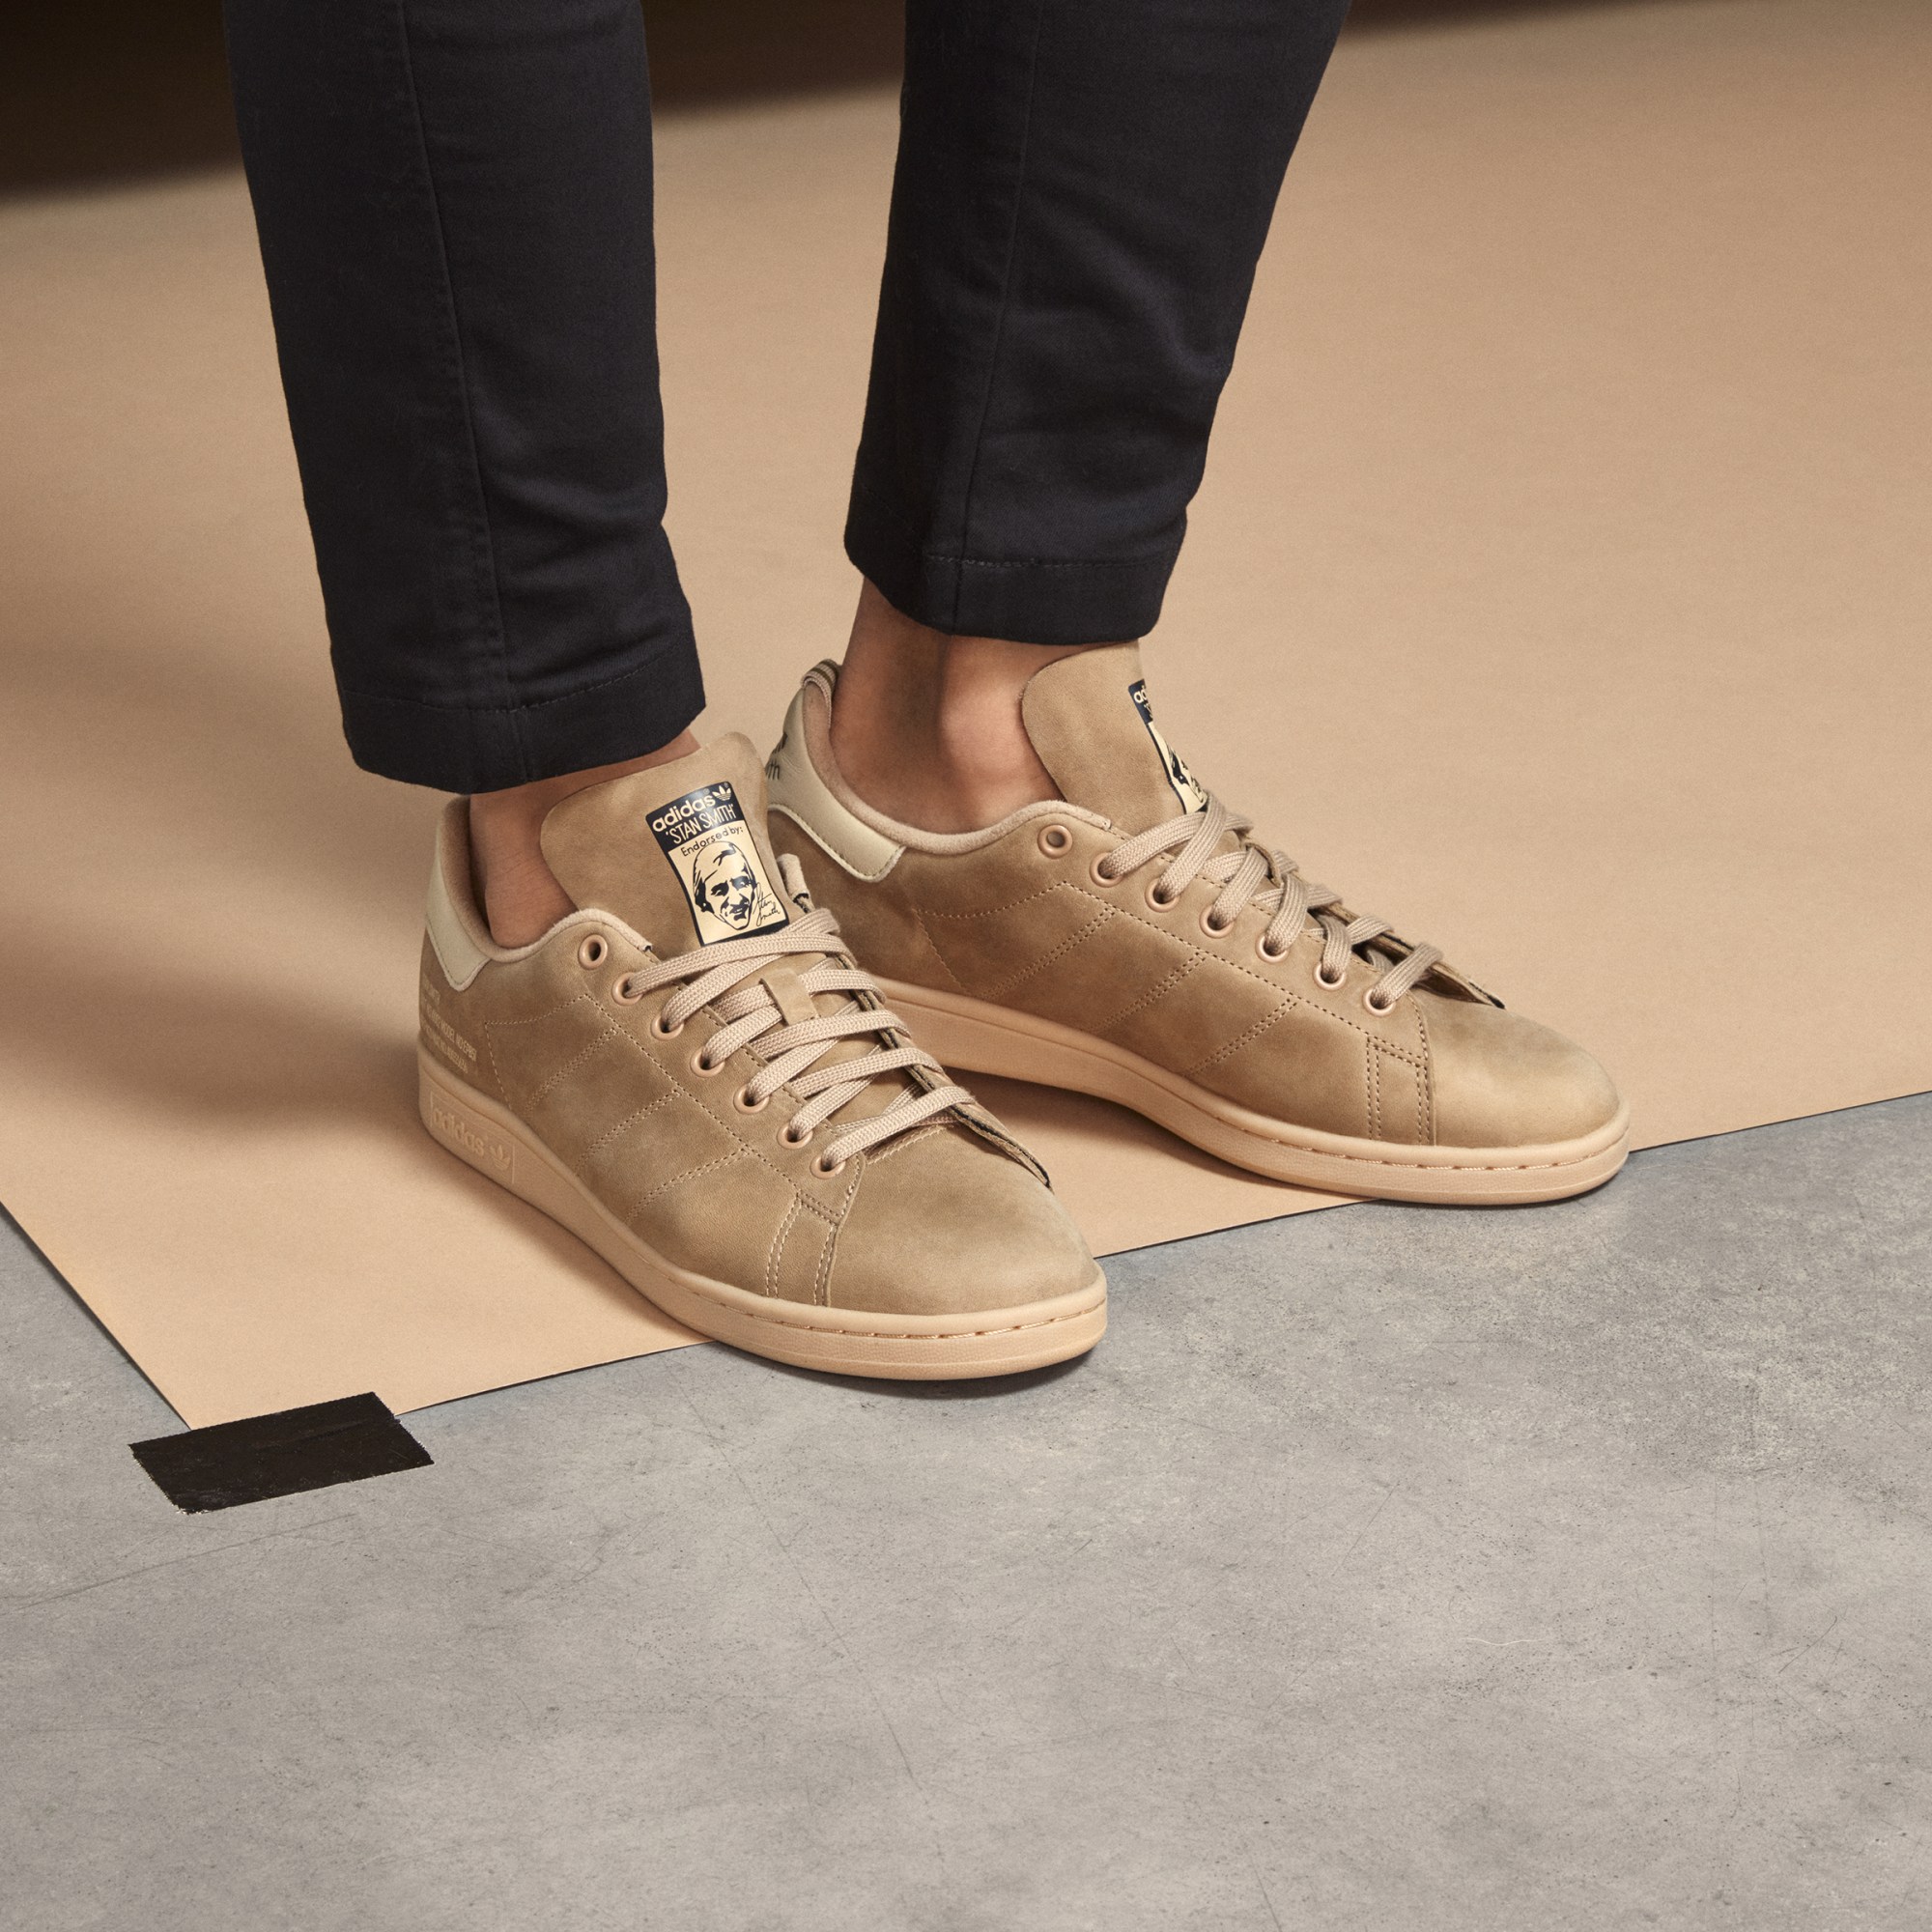 adidas alerts on Twitter: "The Stan Smith returns ready for winter lined with fleece with premium uppers, releasing Tuesday, September 22. https://t.co/8prUfDVksq" / Twitter